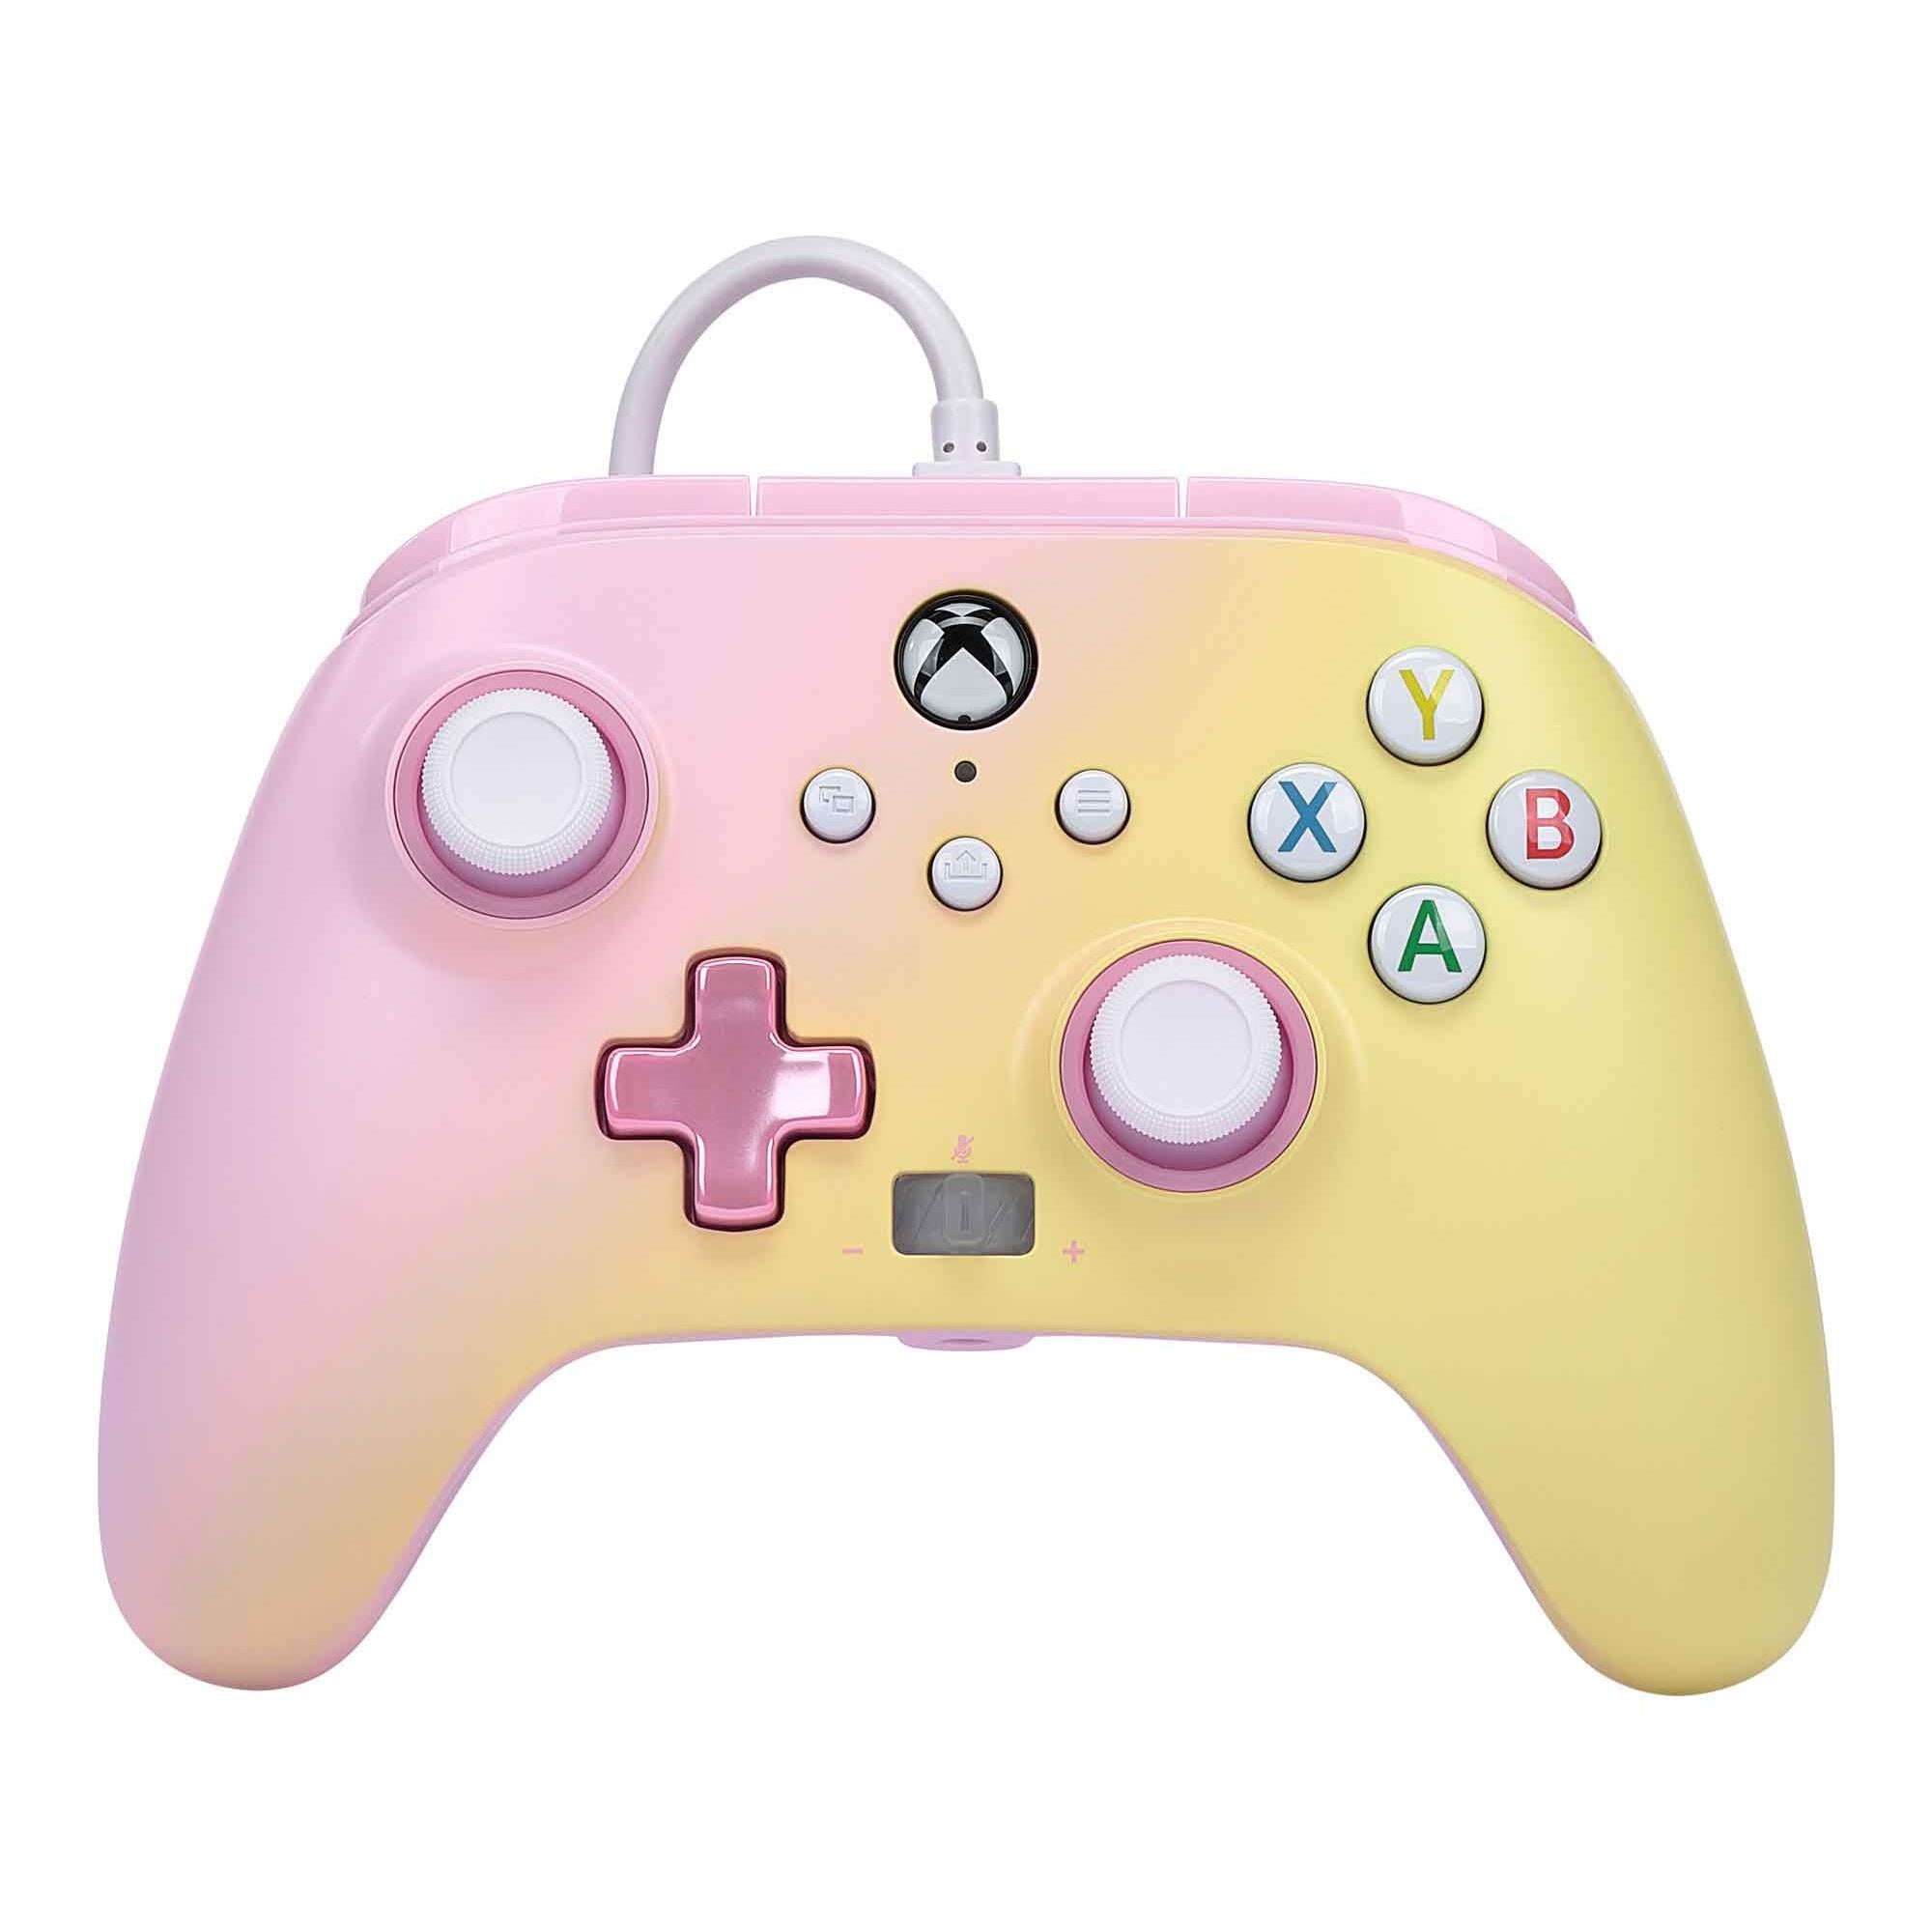 powera enhanced wired controller for xbox series x|s (pink lemonade)